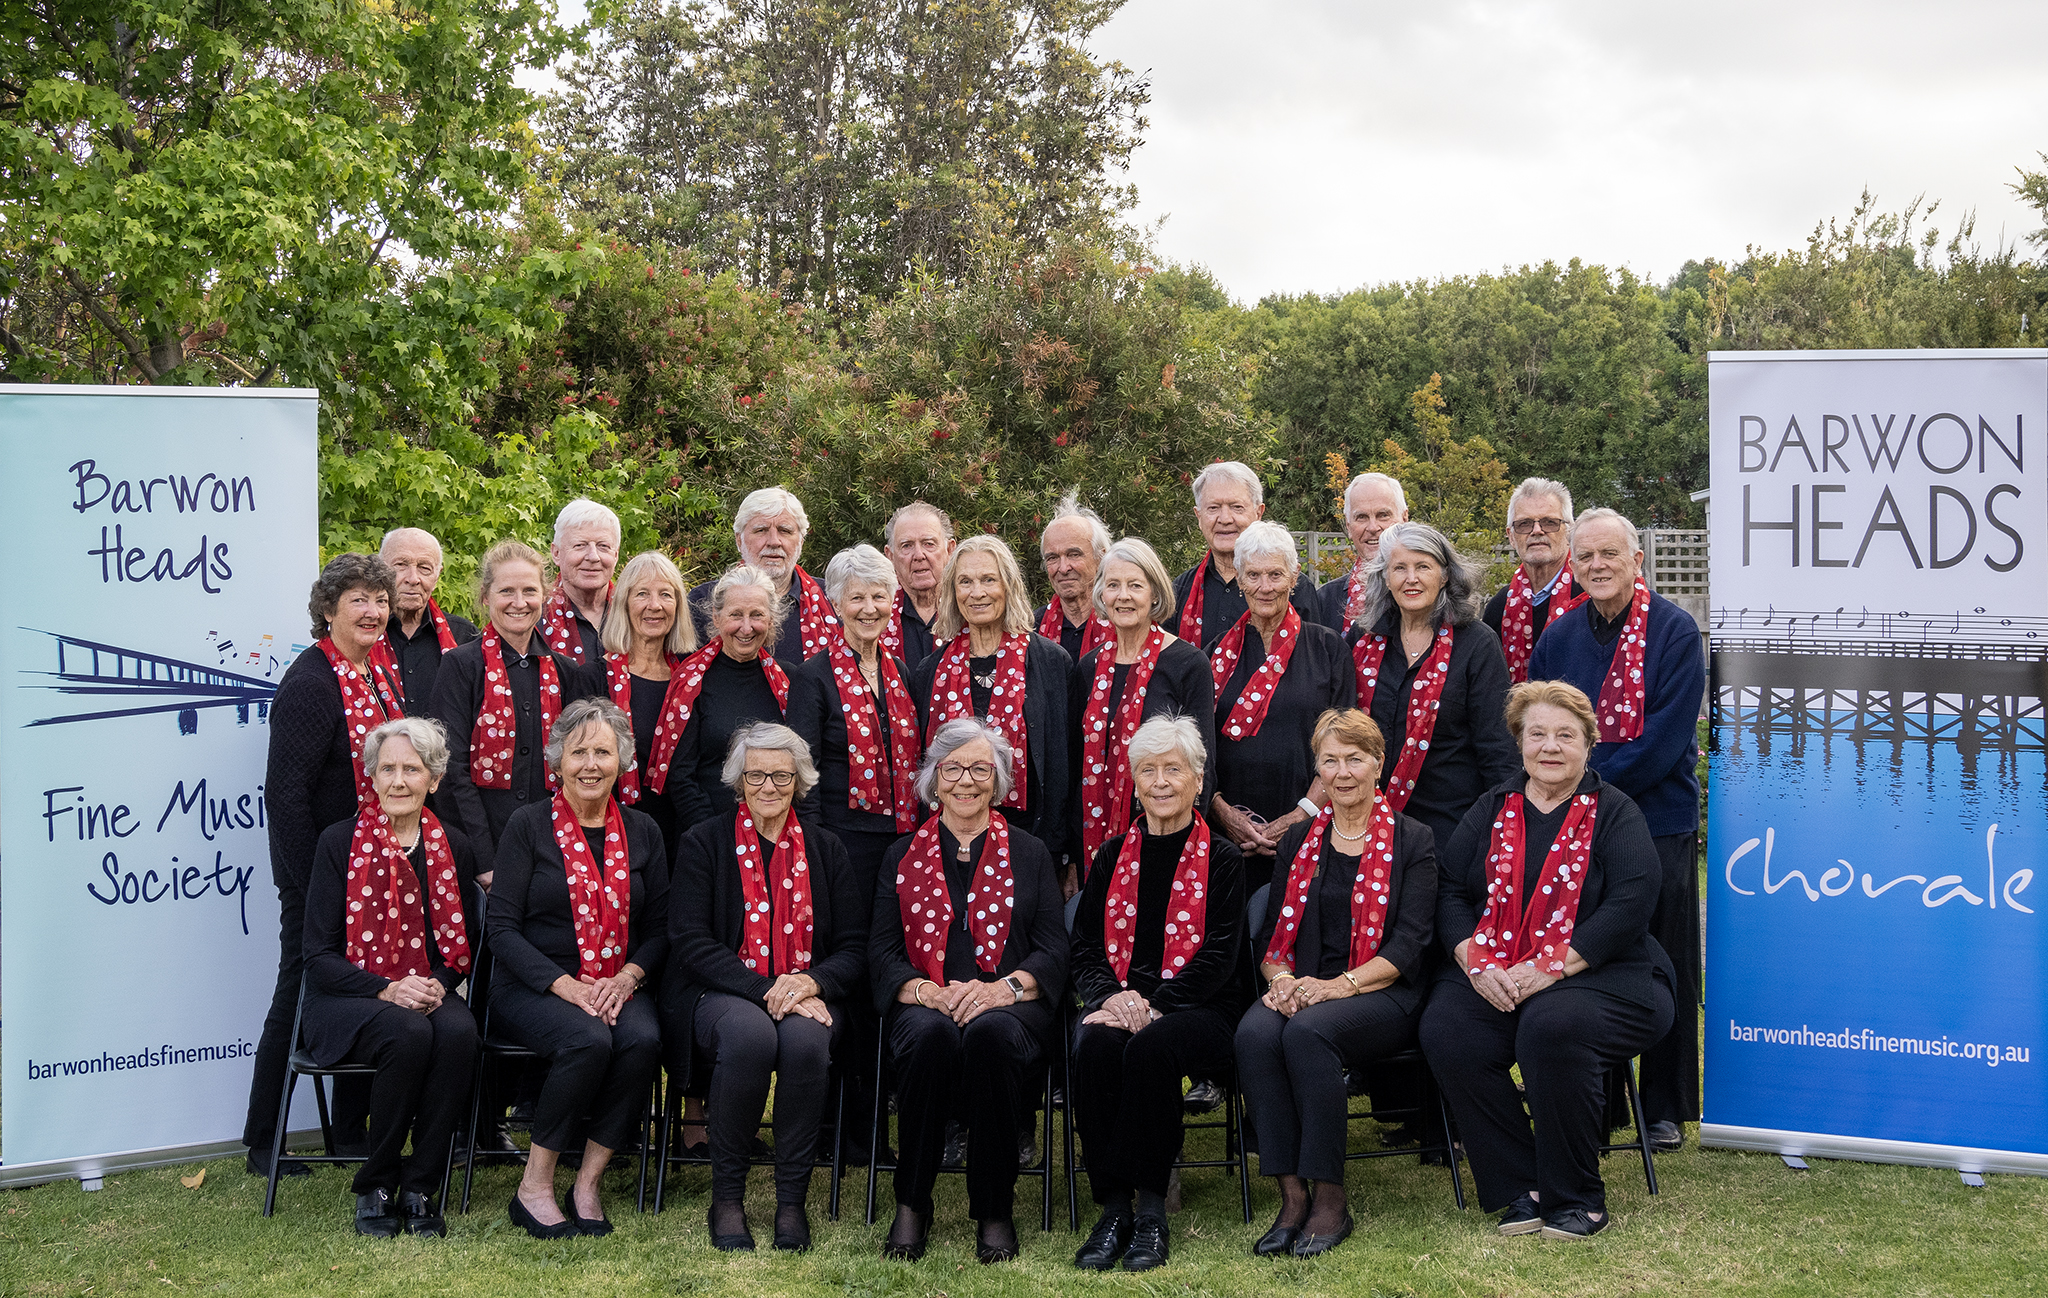 Welcome to the Barwon Heads Fine Music Society